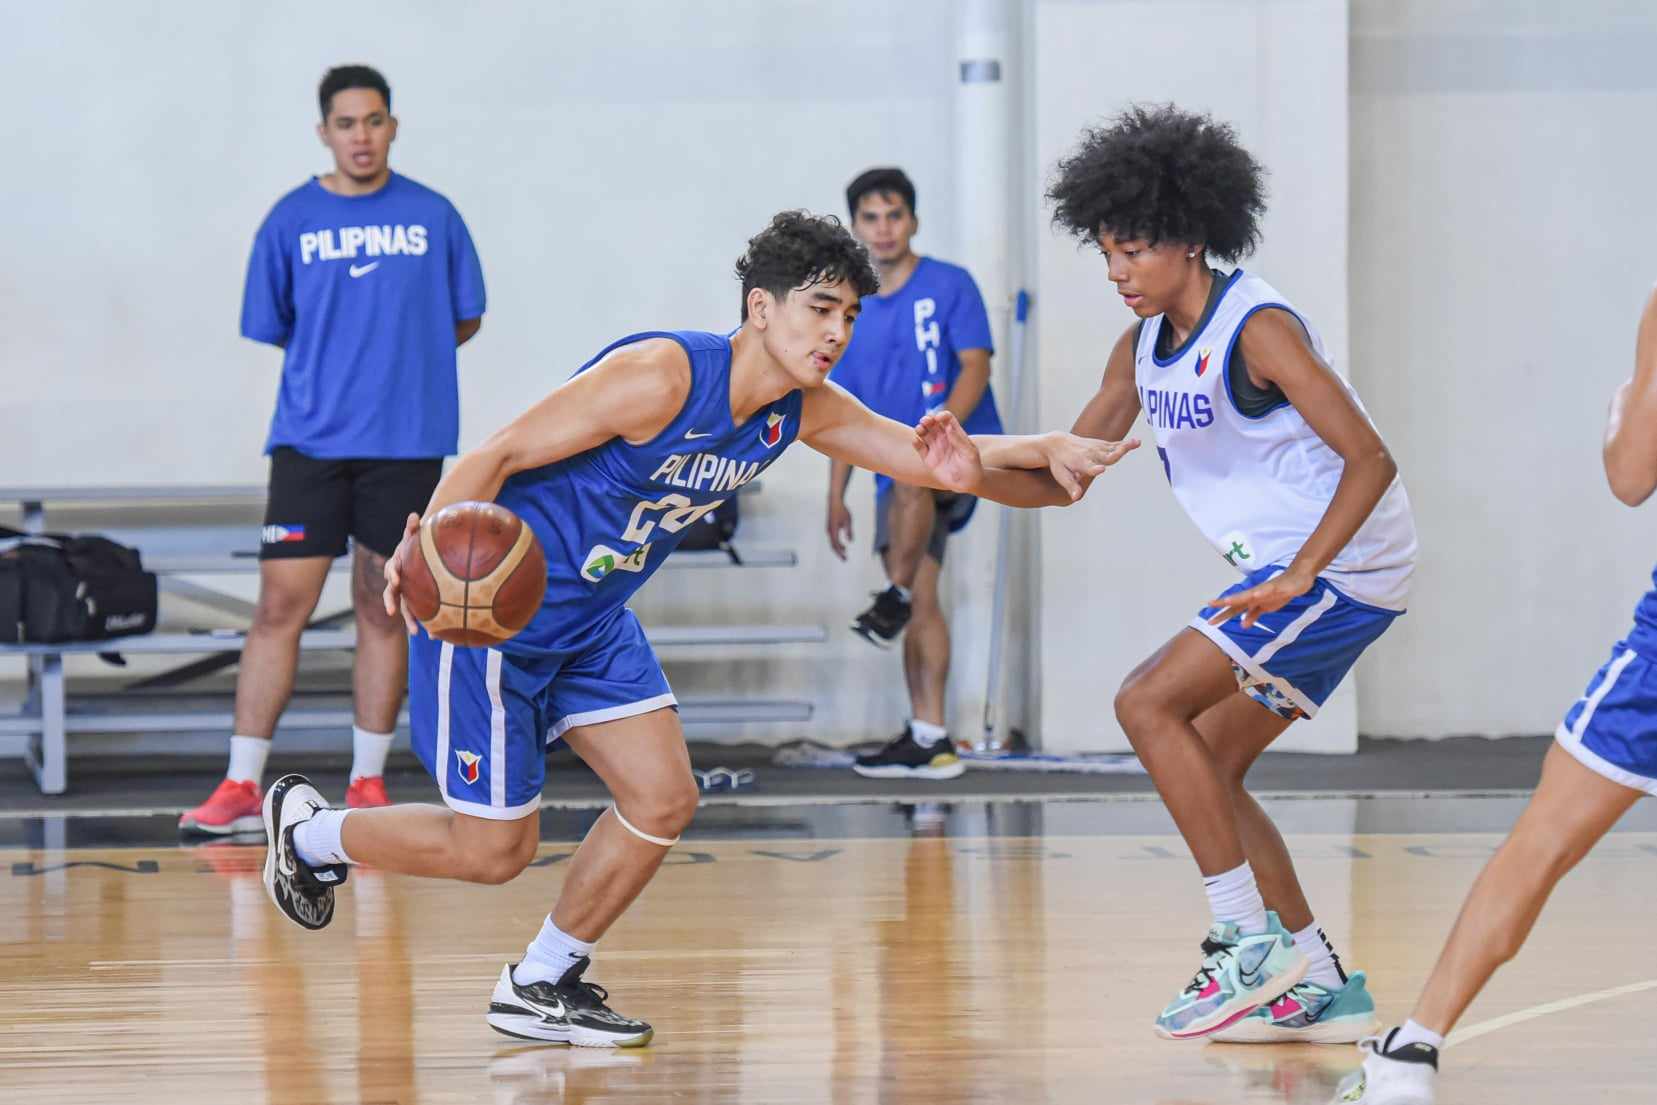 Gilas-Youth-Kieffer-Alas From being Louie's understudy to coaching Kieffer: Allen Ricardo comes full circle Basketball Gilas Pilipinas News  - philippine sports news